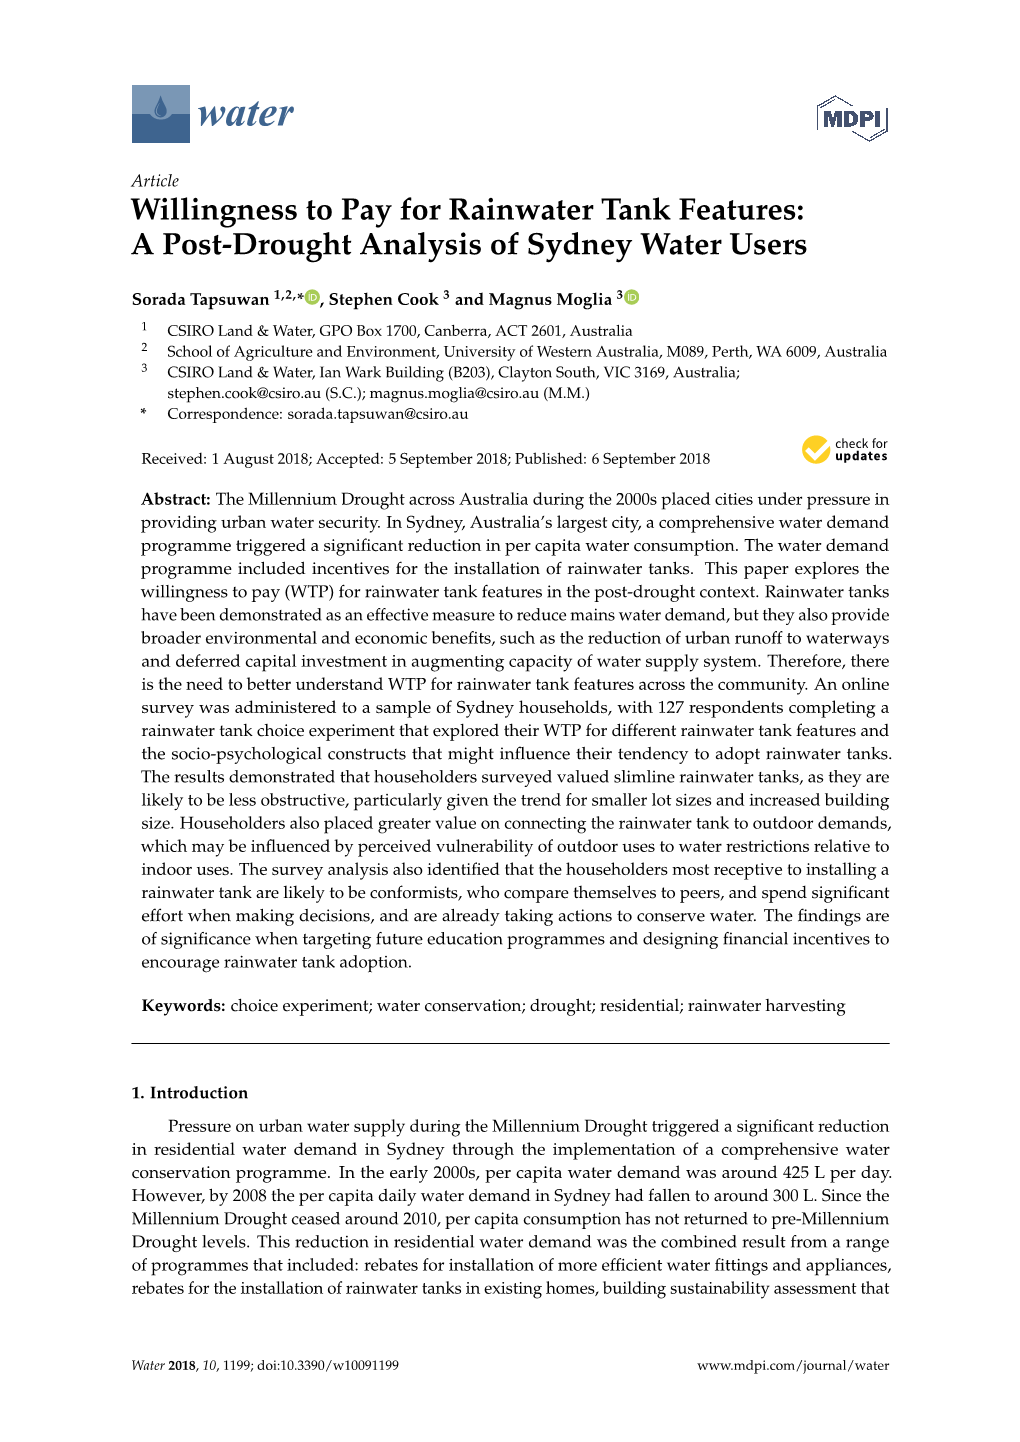 Willingness to Pay for Rainwater Tank Features: a Post-Drought Analysis of Sydney Water Users